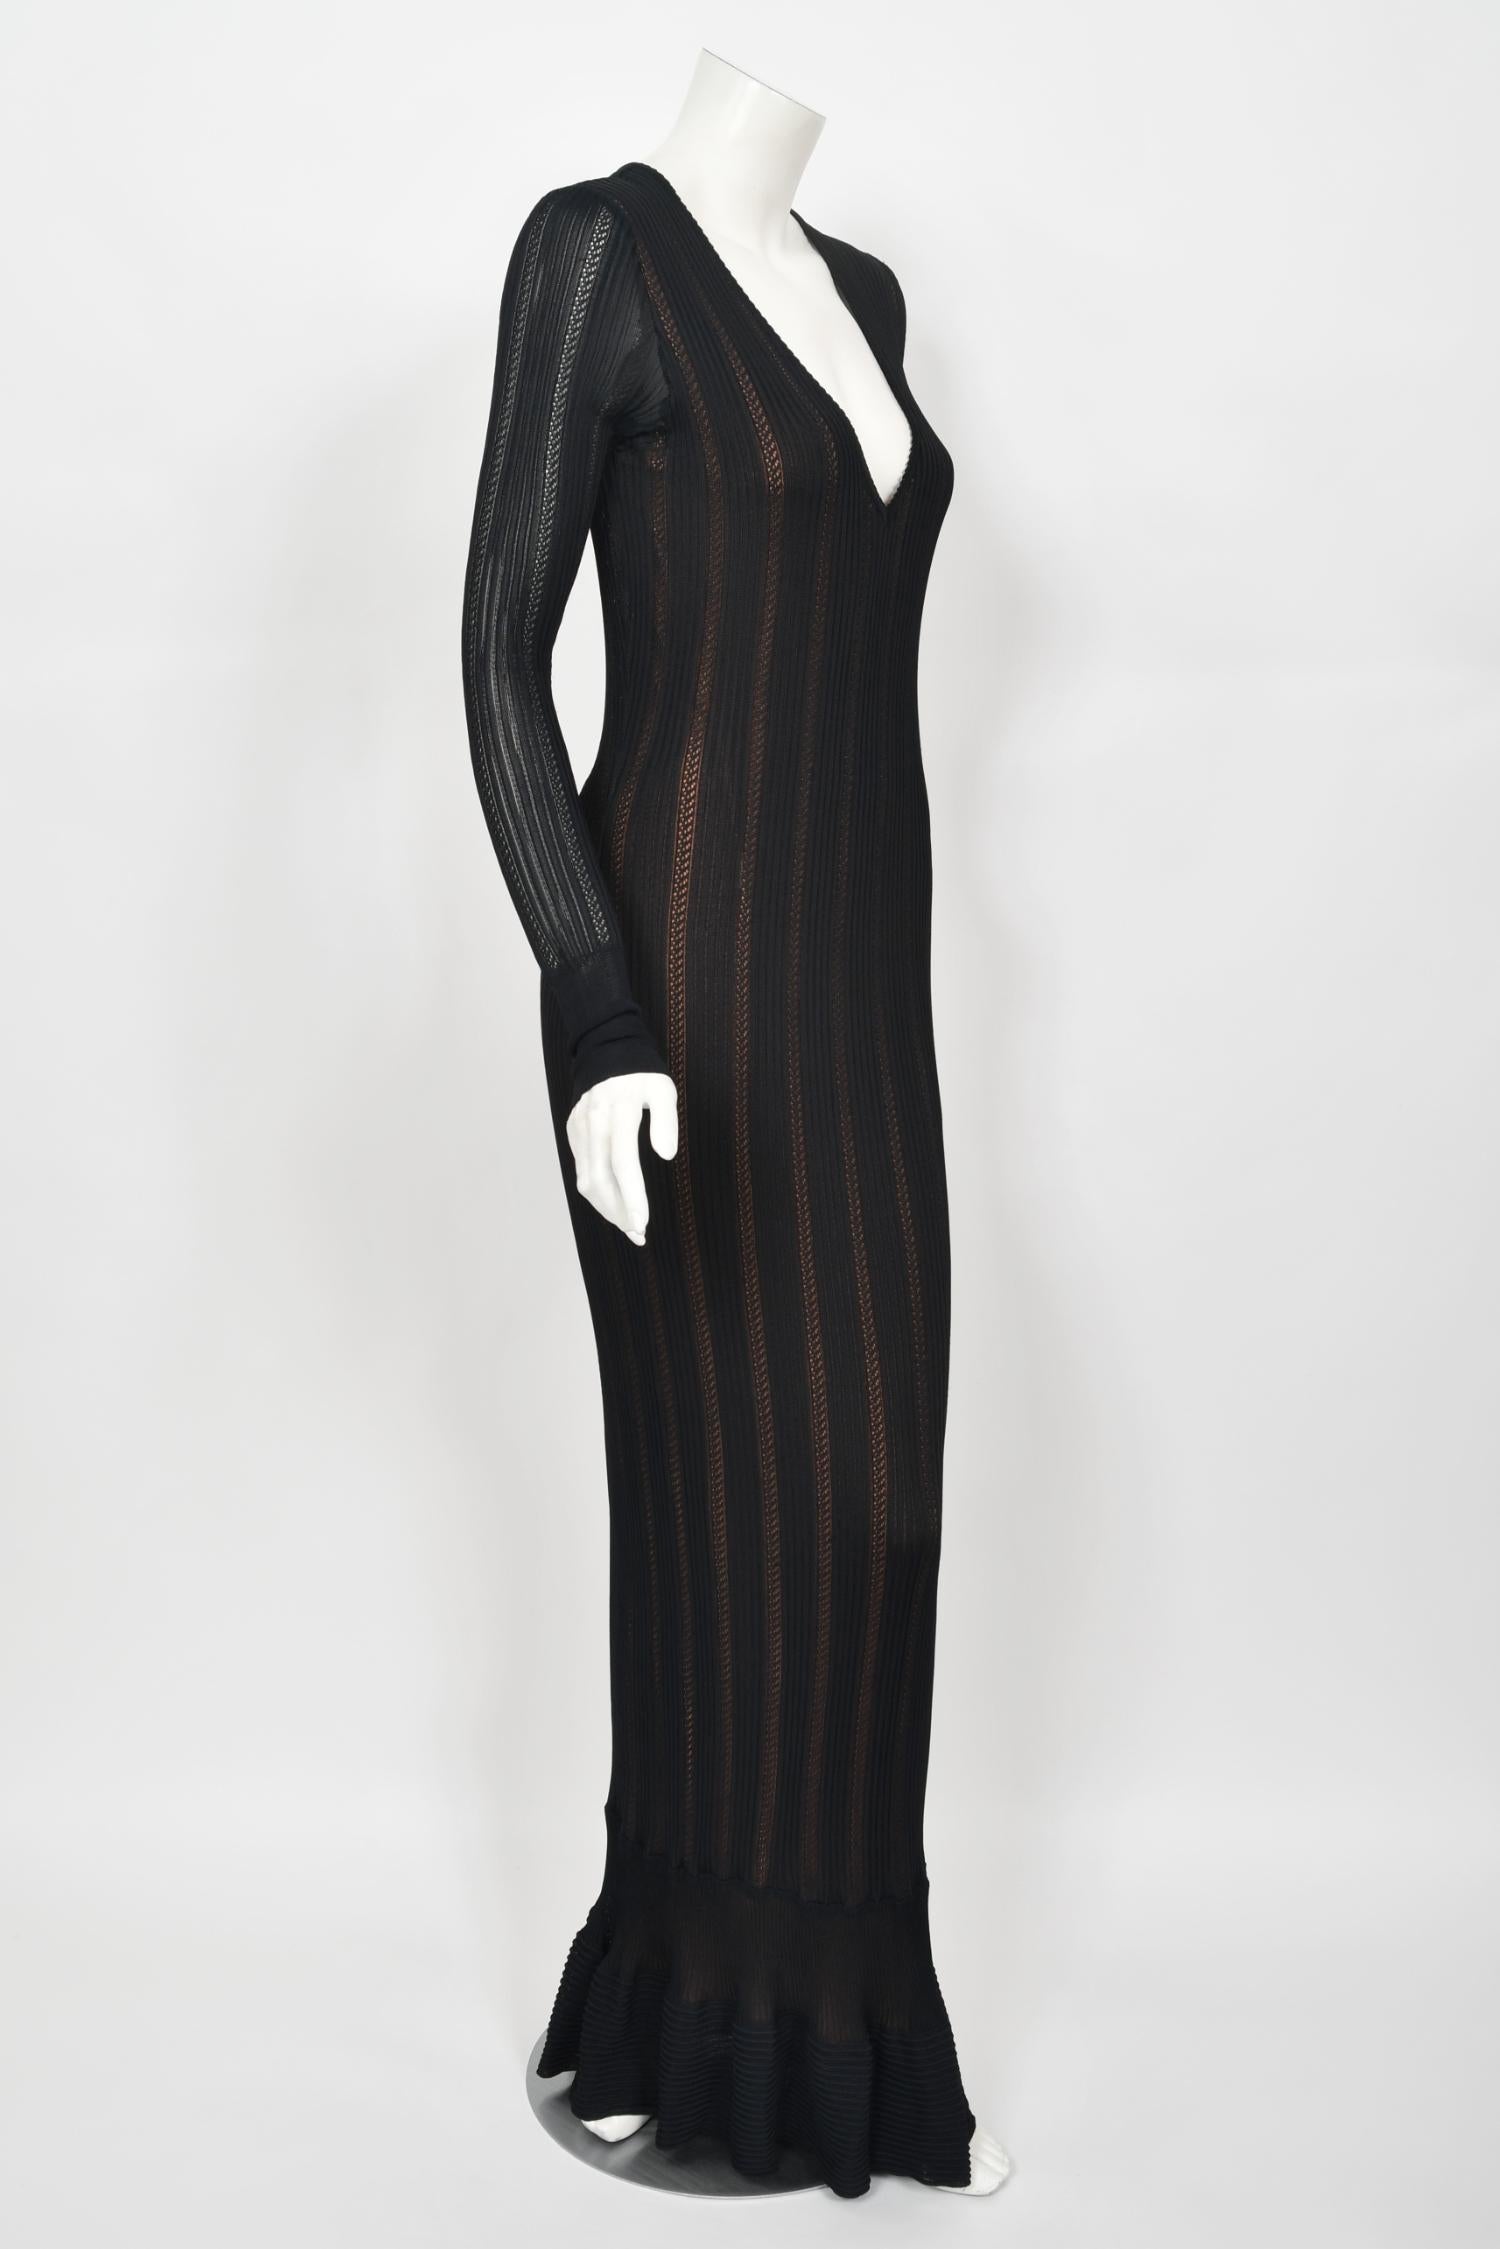 1996 Azzedine Alaia Documented Rare Nude Illusion Knit Bodycon Floor Length Gown For Sale 4